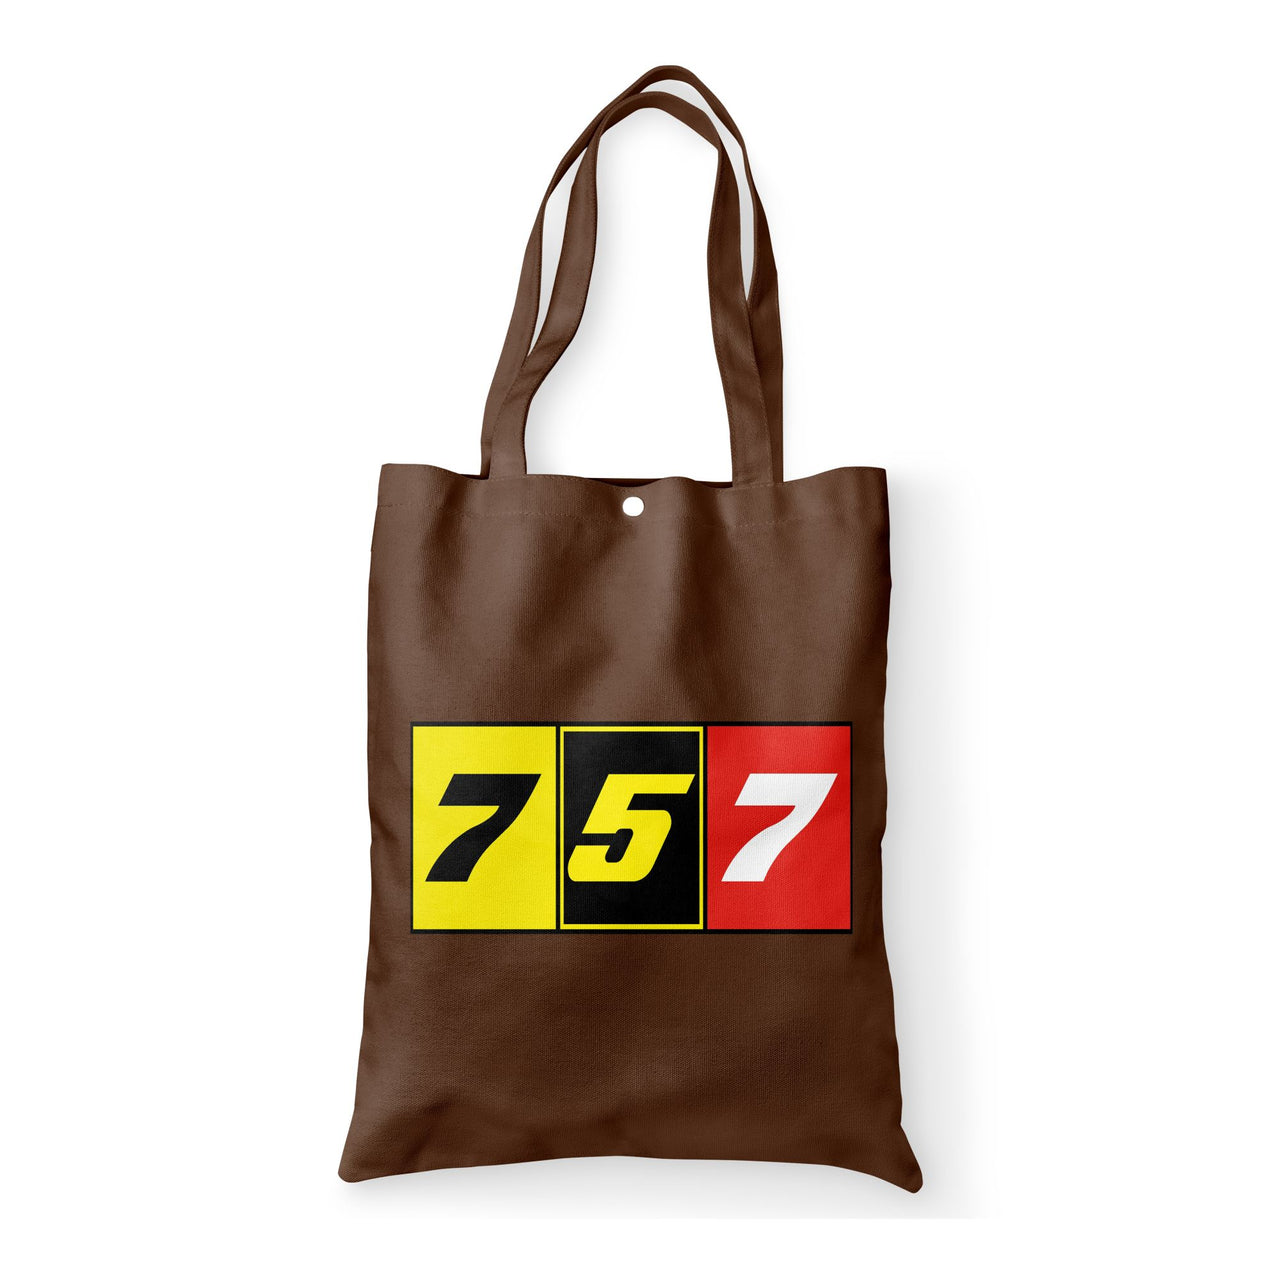 Flat Colourful 757 Designed Tote Bags